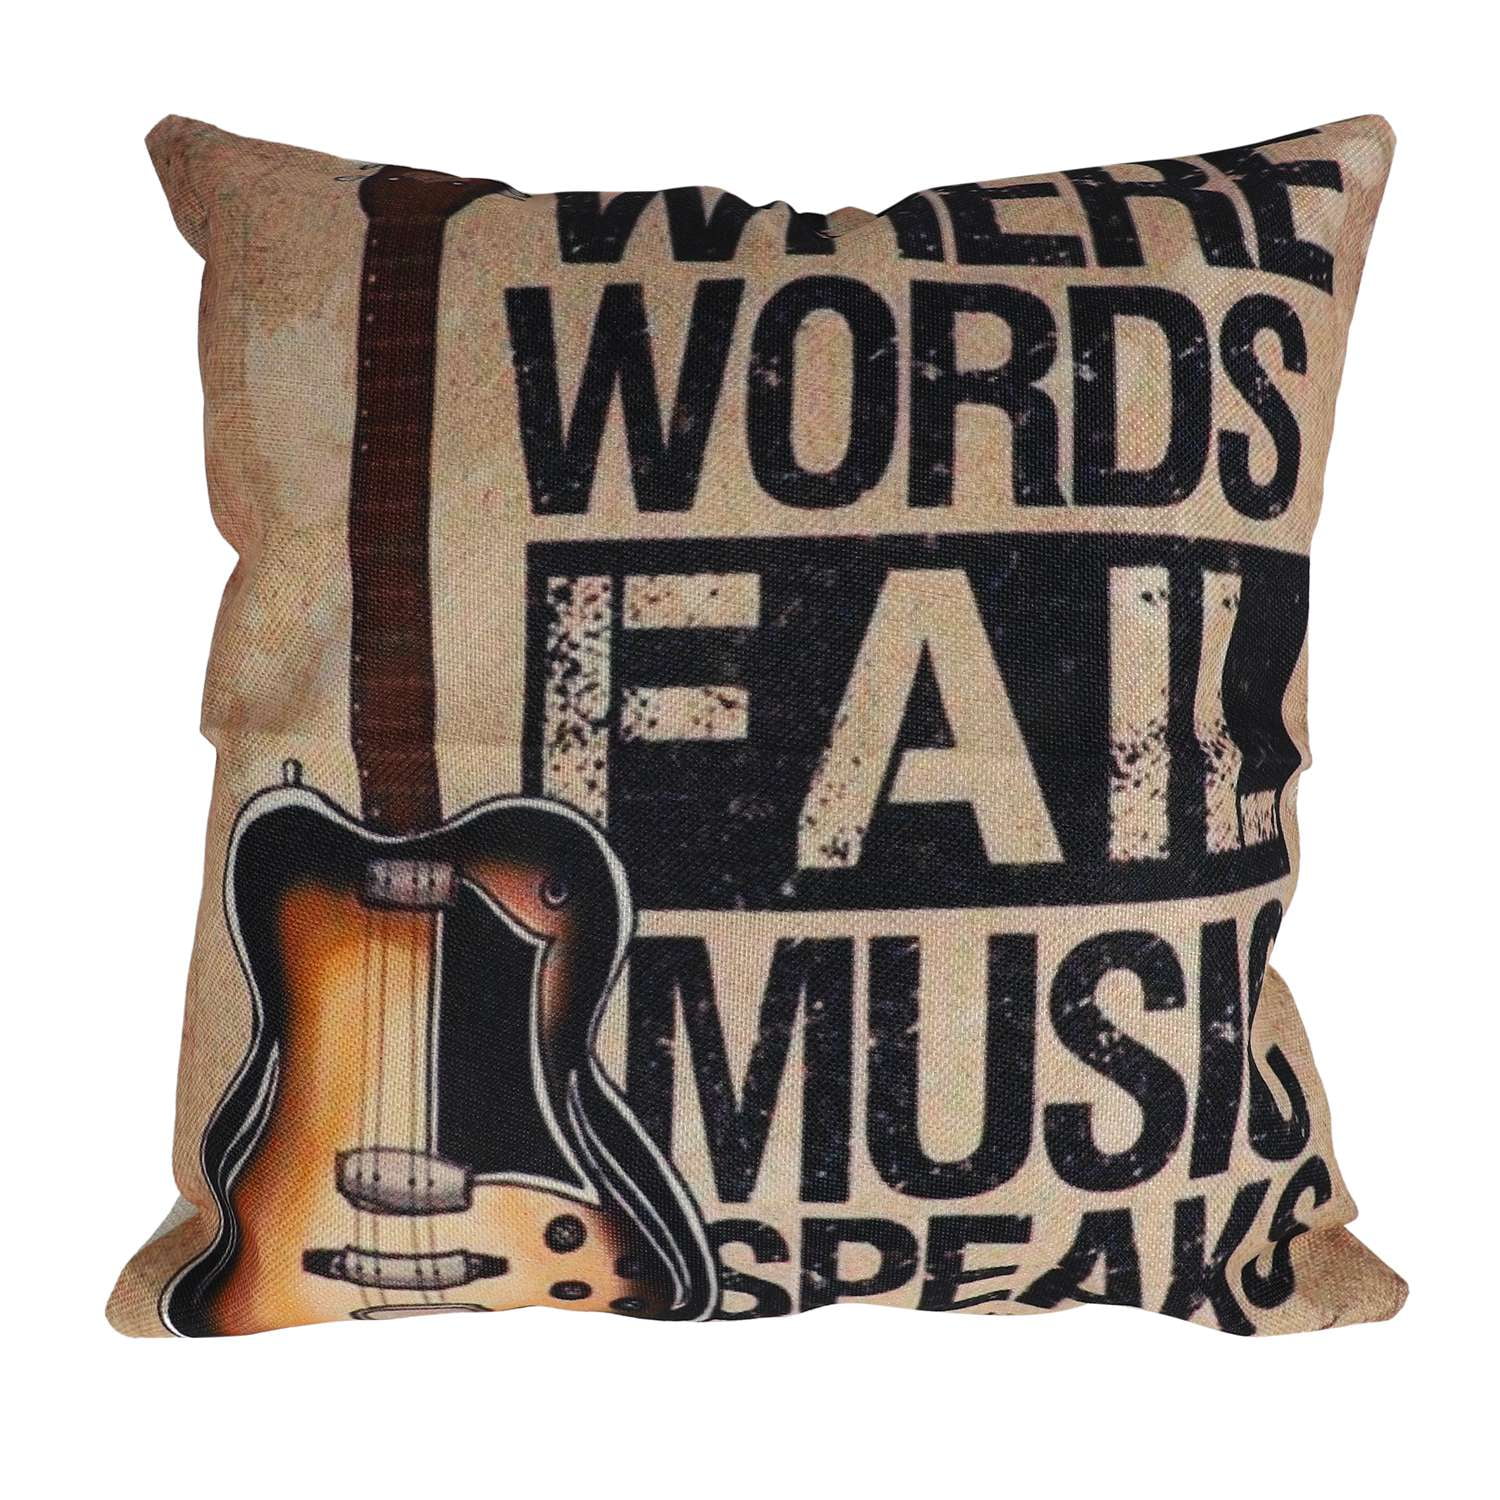 MINIOZE Dream Guitar Music Wings Black Lover Print Plush Soft Square Pillow Covers Home Decor Cushion Covers Decorations Gifts Pillowcase for Indoor Sofa Bedroom Car 18 x 18 Inch